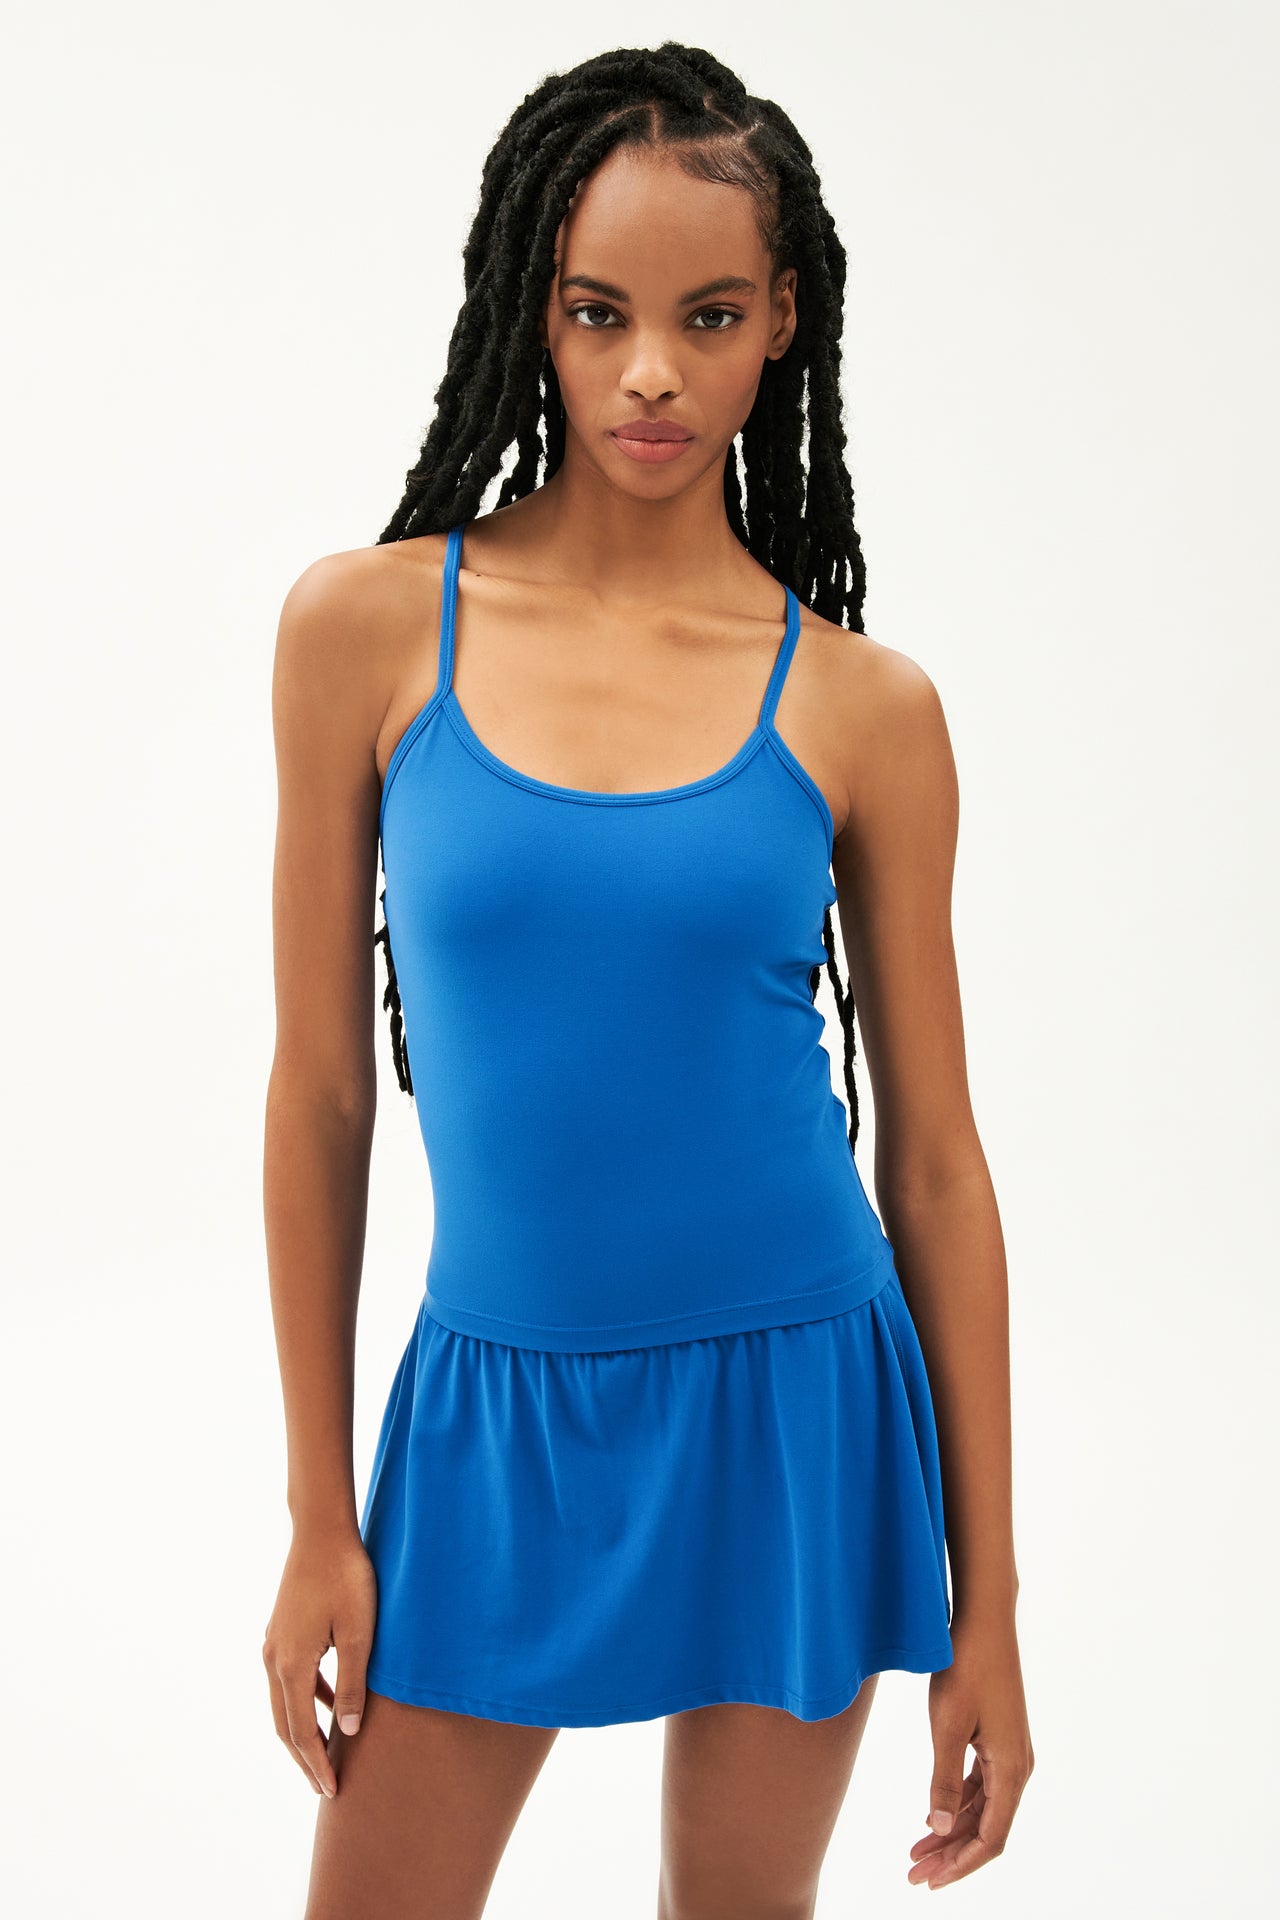 Front view of girl wearing blue spaghetti strap tank top with blue skirt